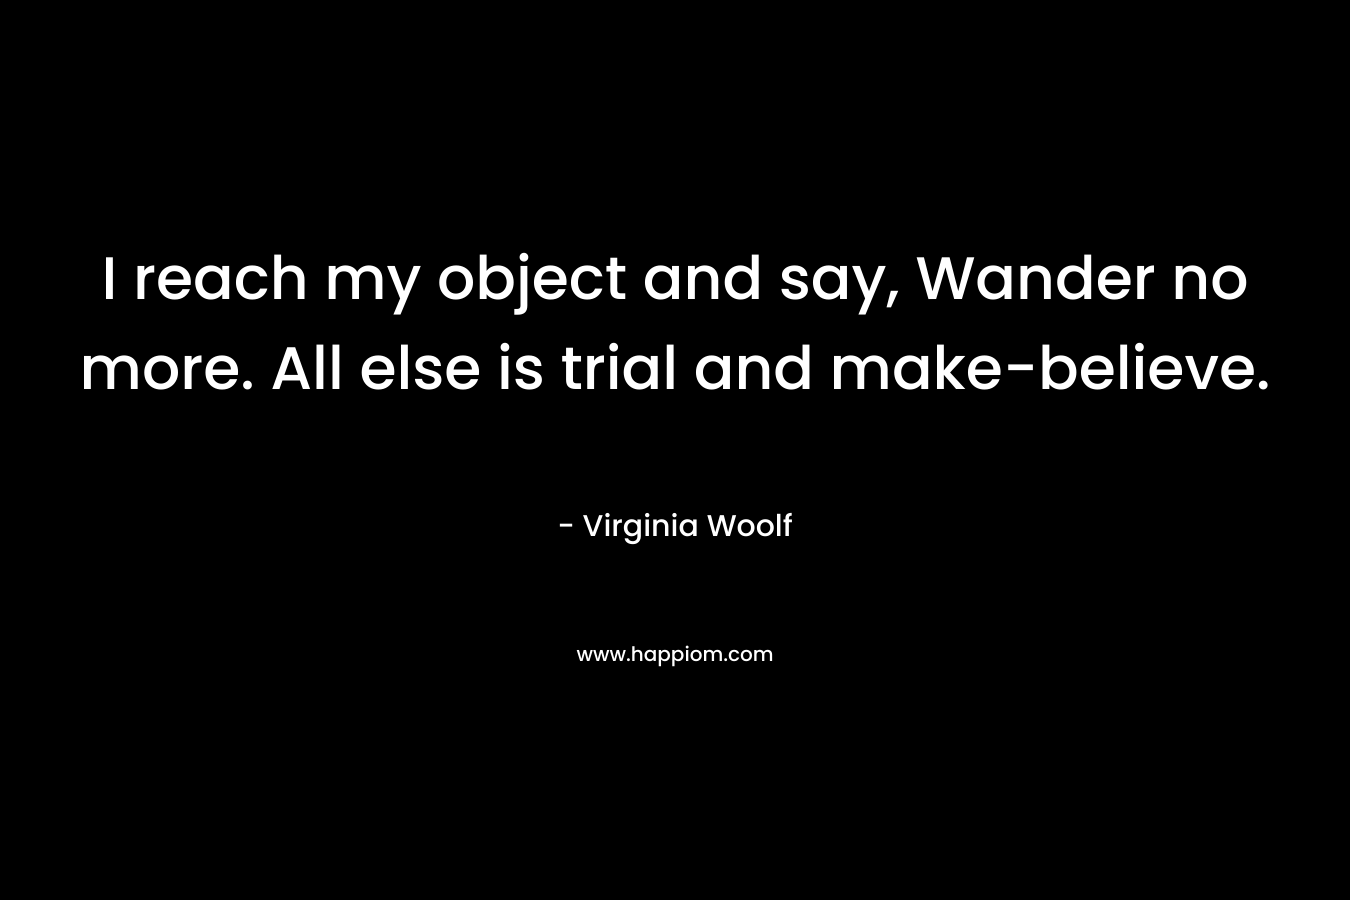 I reach my object and say, Wander no more. All else is trial and make-believe.